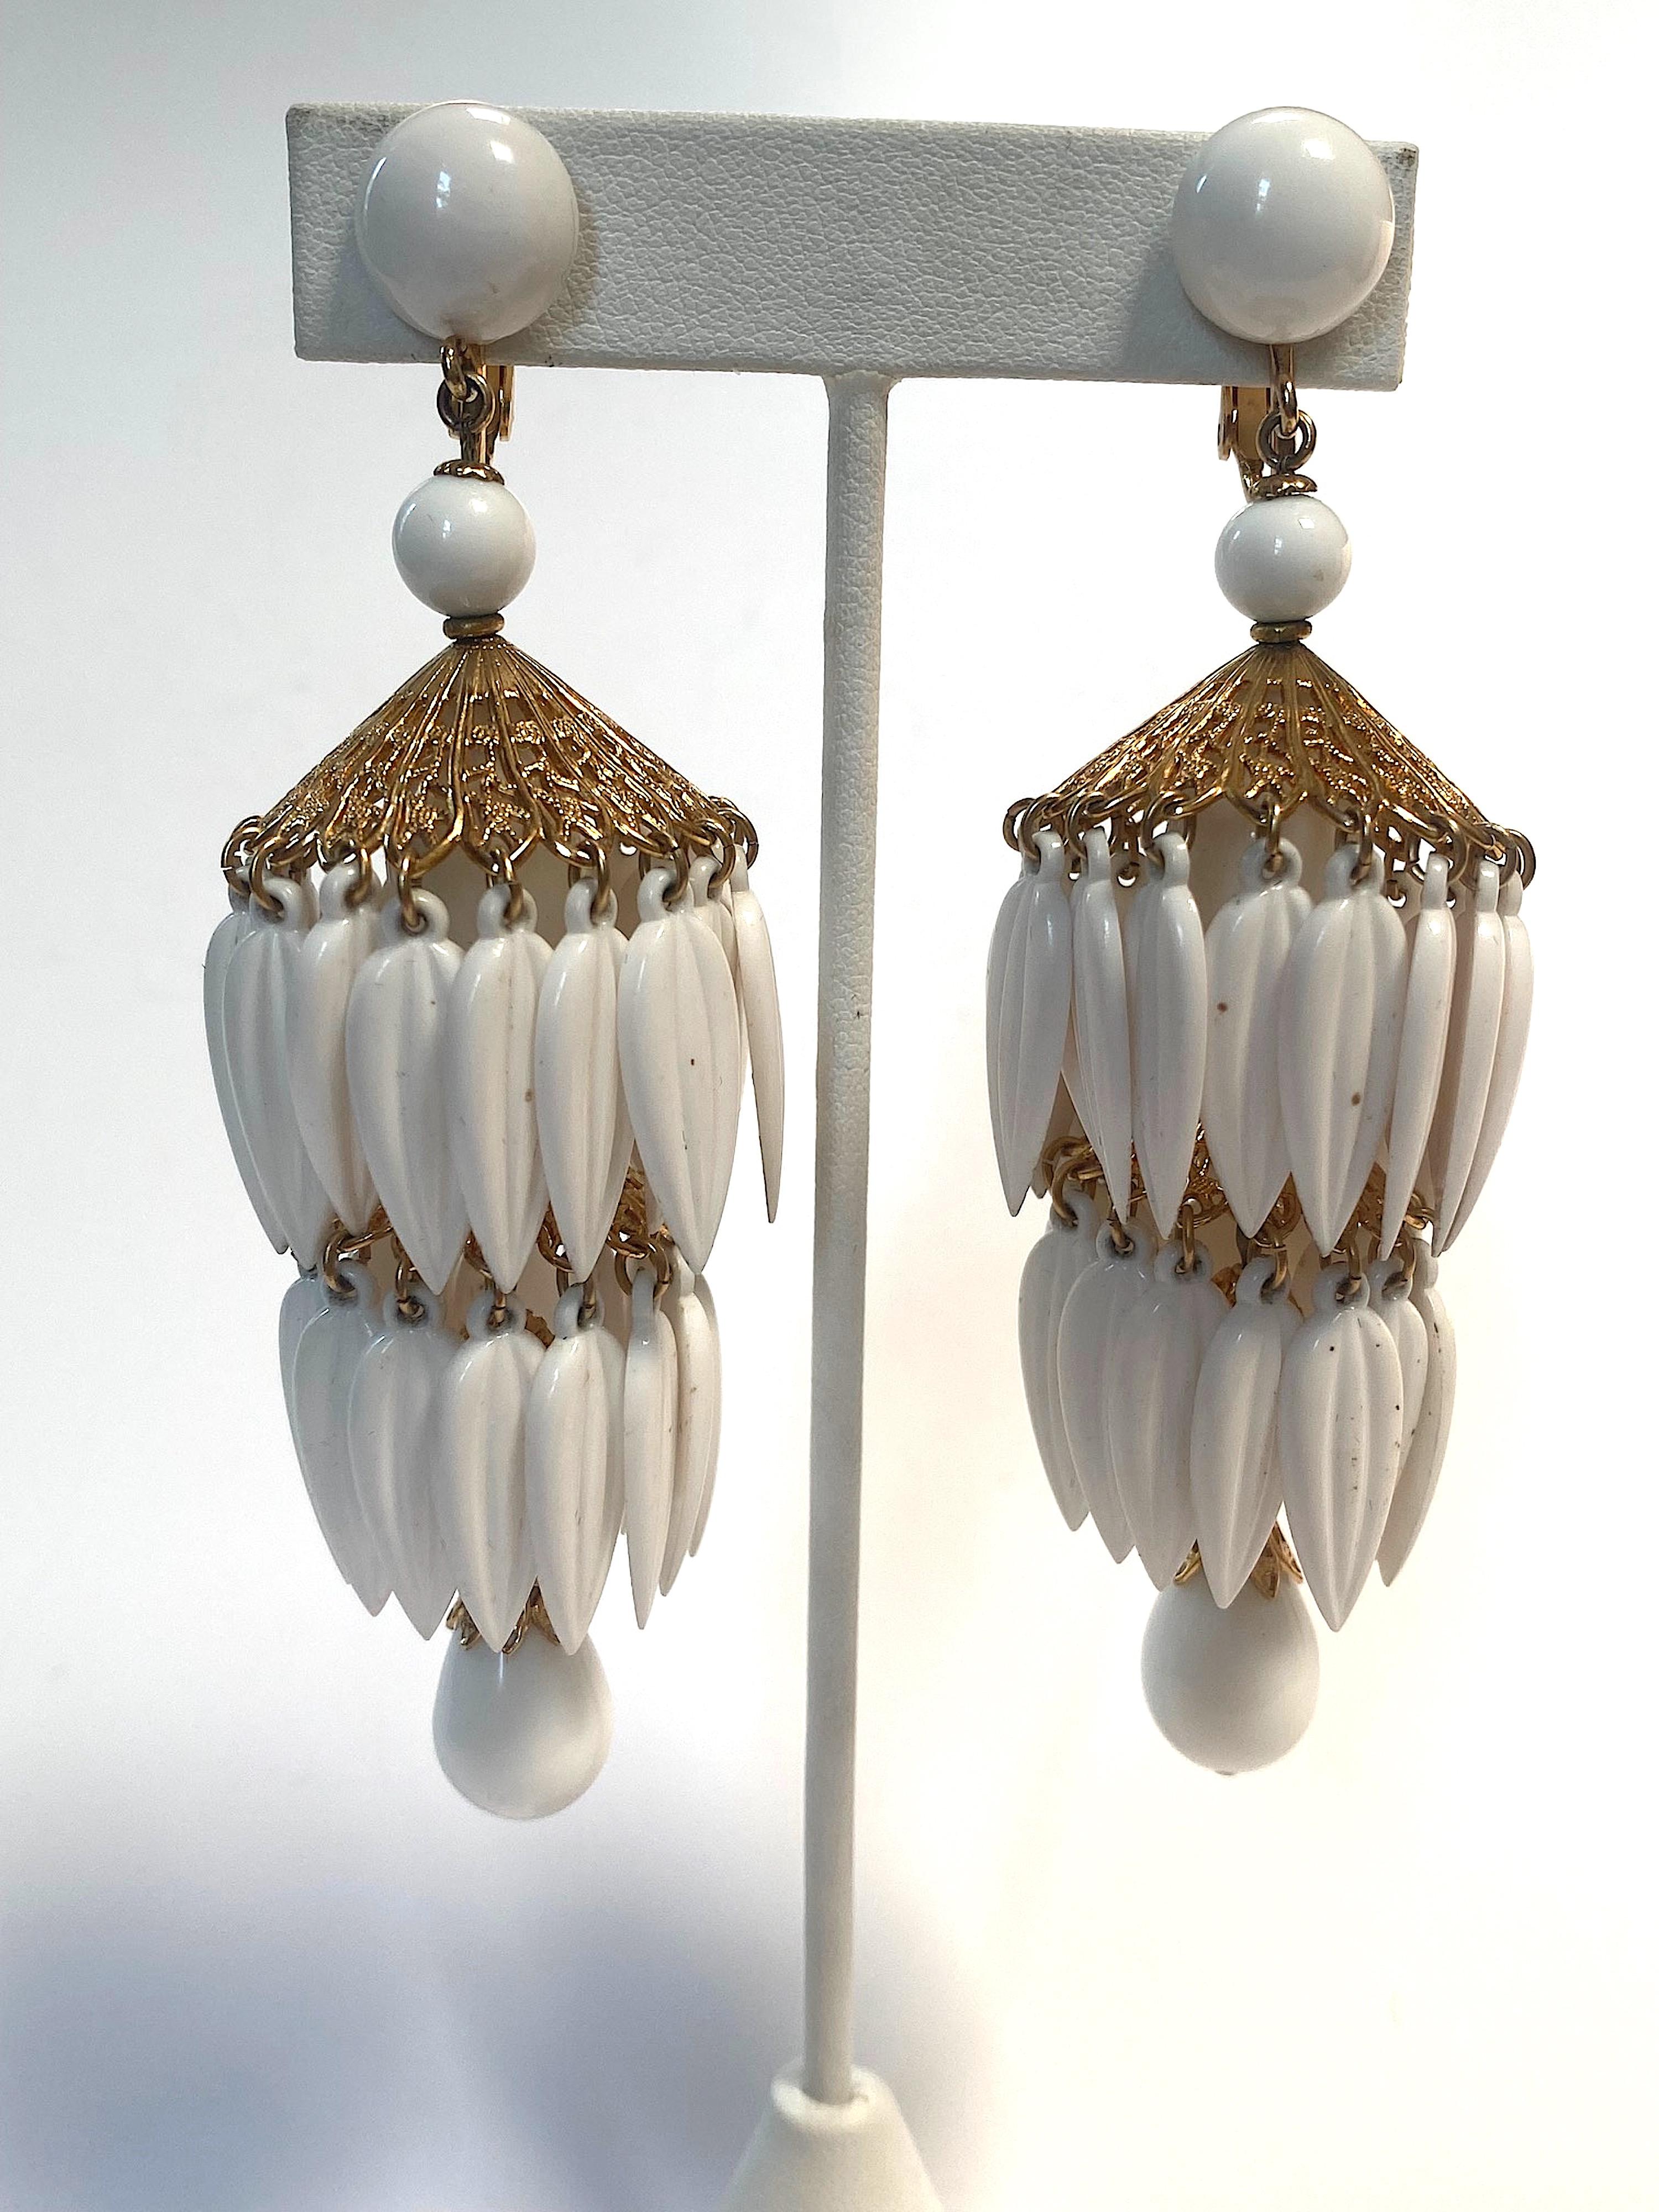 Presented is a beautiful and rare pair of 1960s large chandelier pendant earrings by American fashion jewelry Napier Co. Napier jewelry is notable for its simple, modern, geometric and floral designs. However, the company also produce boutique and